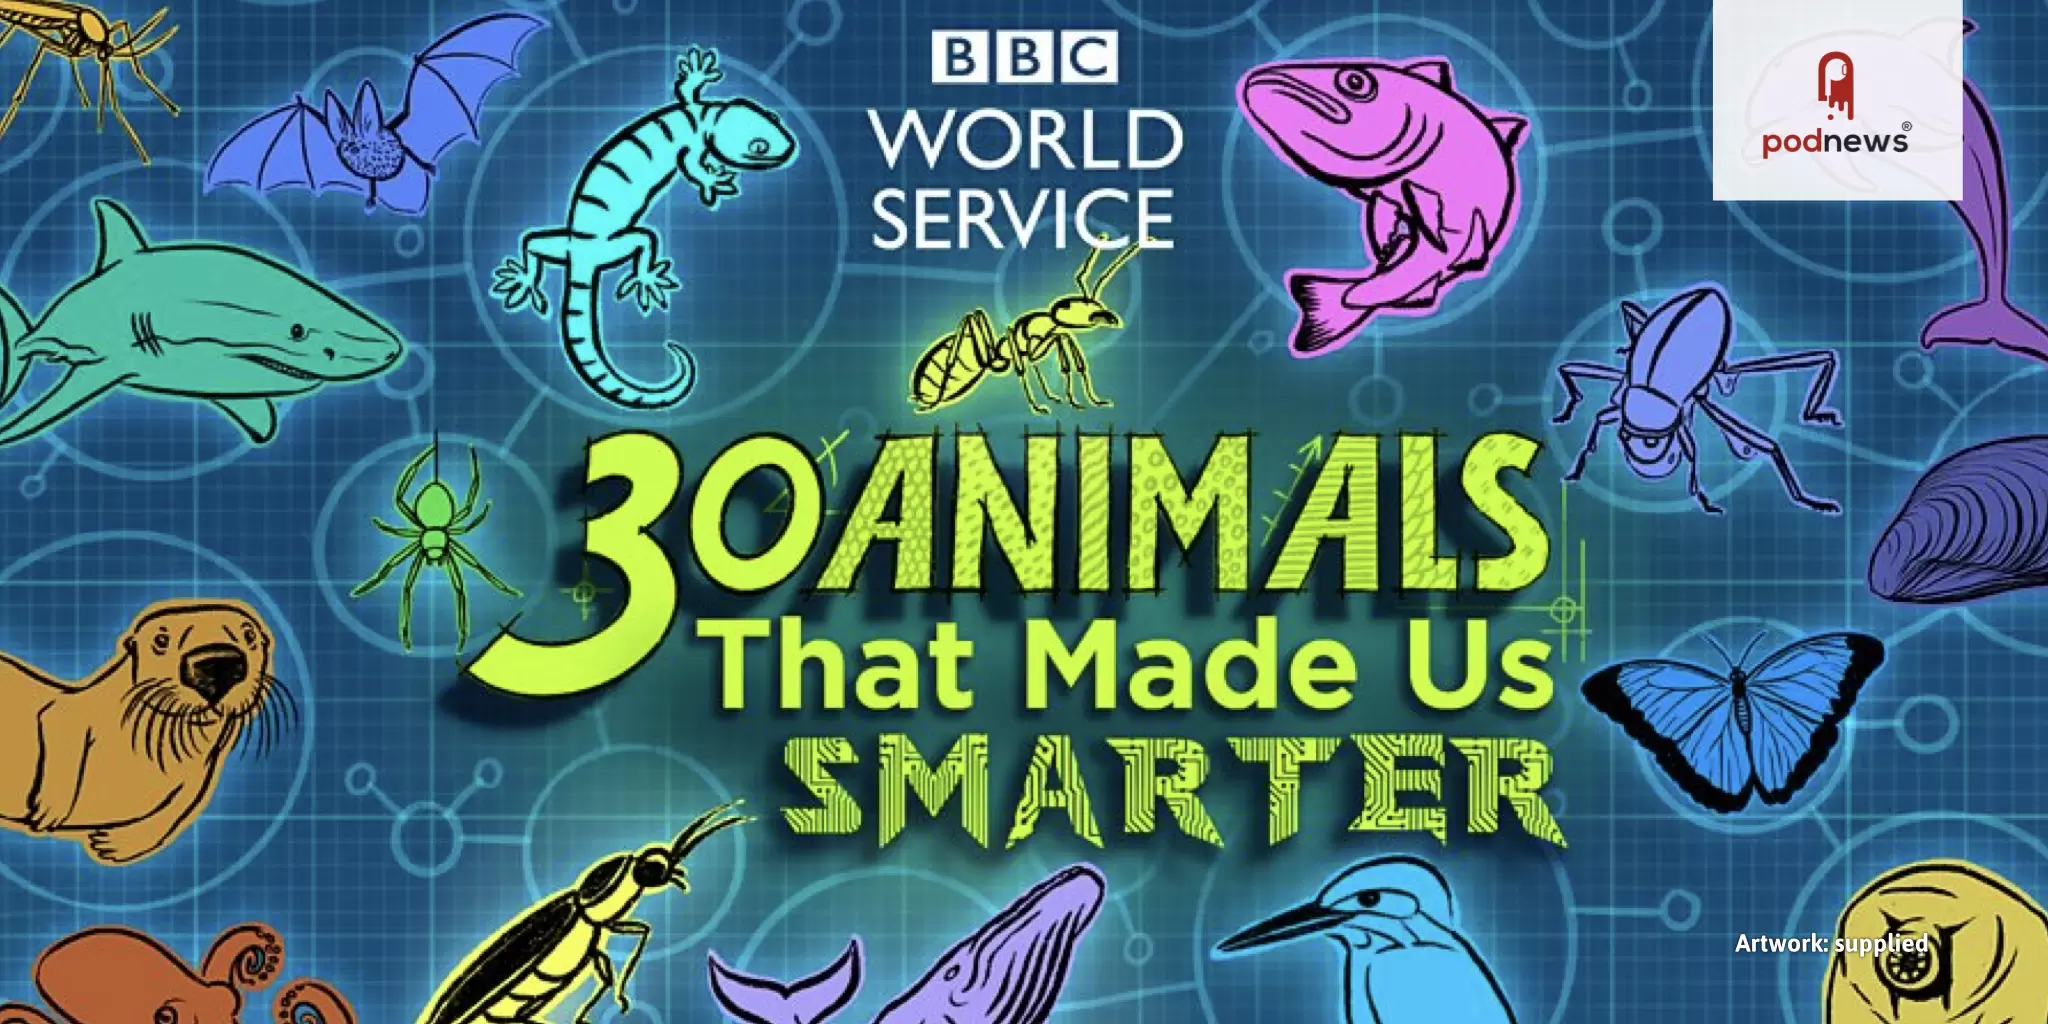 BBC World Service launches new podcast about animals and innovation